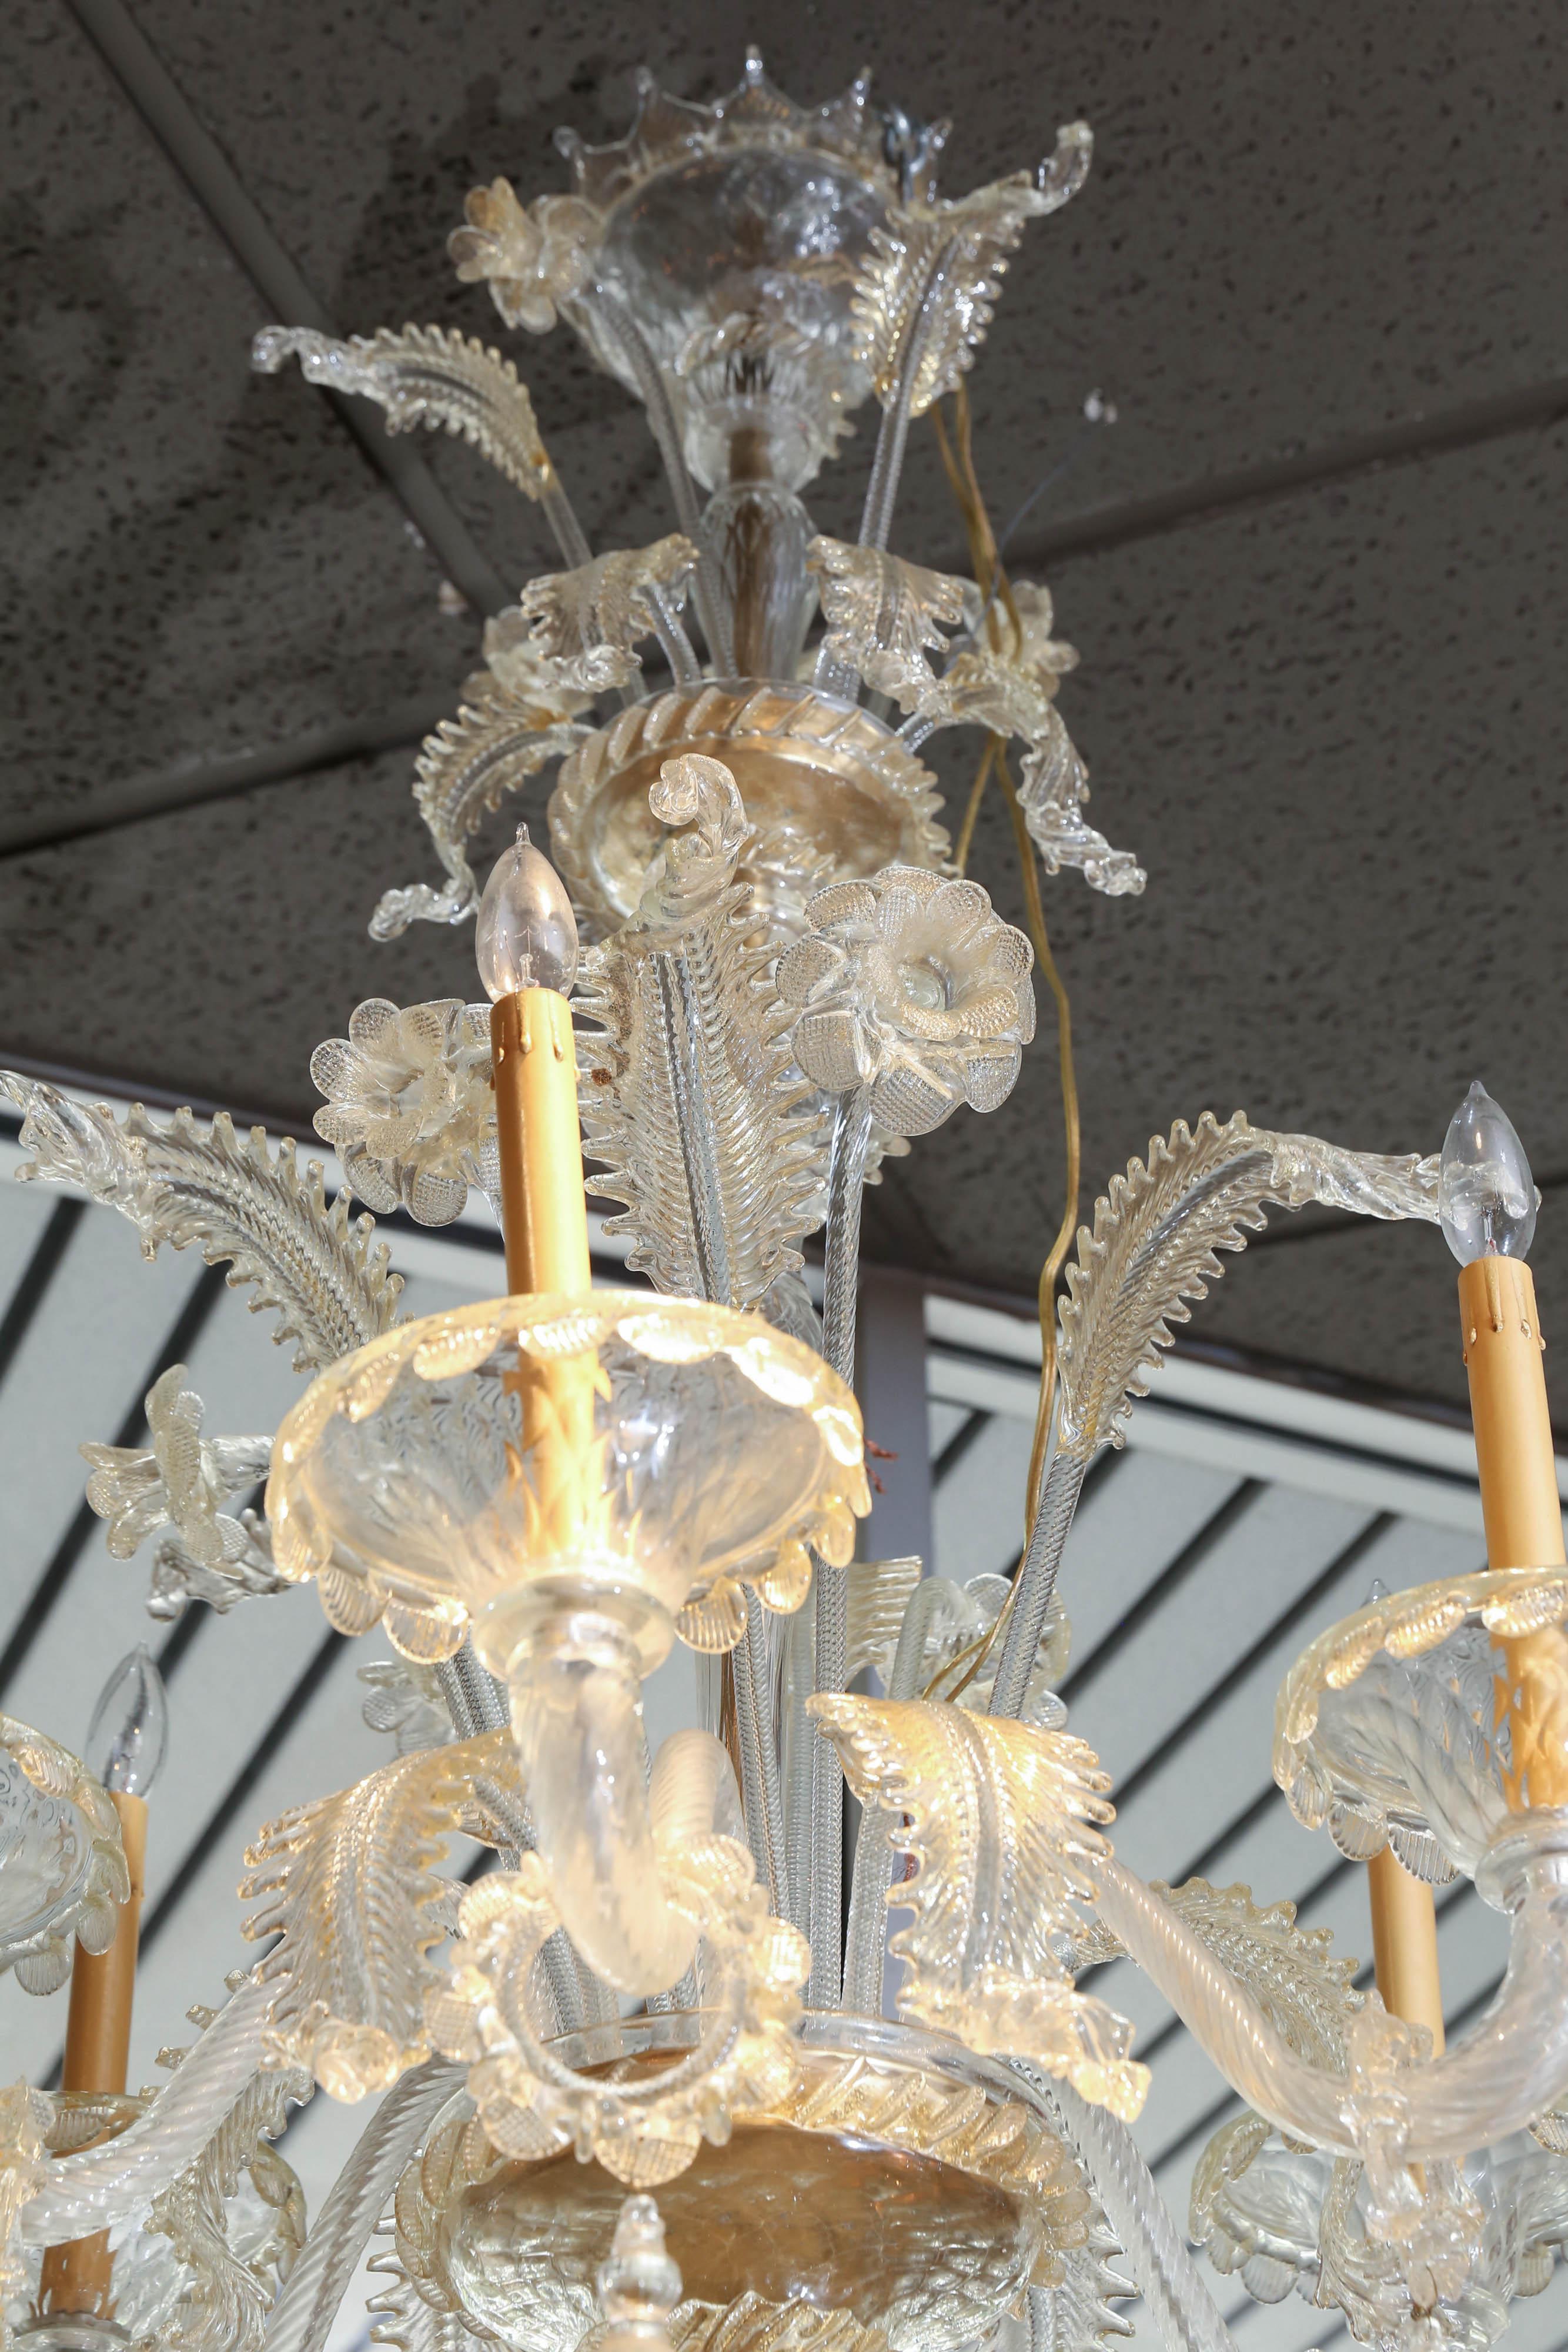 20th Century Monumental Venetian Glass Chandelier with 18 Lights on Two Tiers in Pale Gold